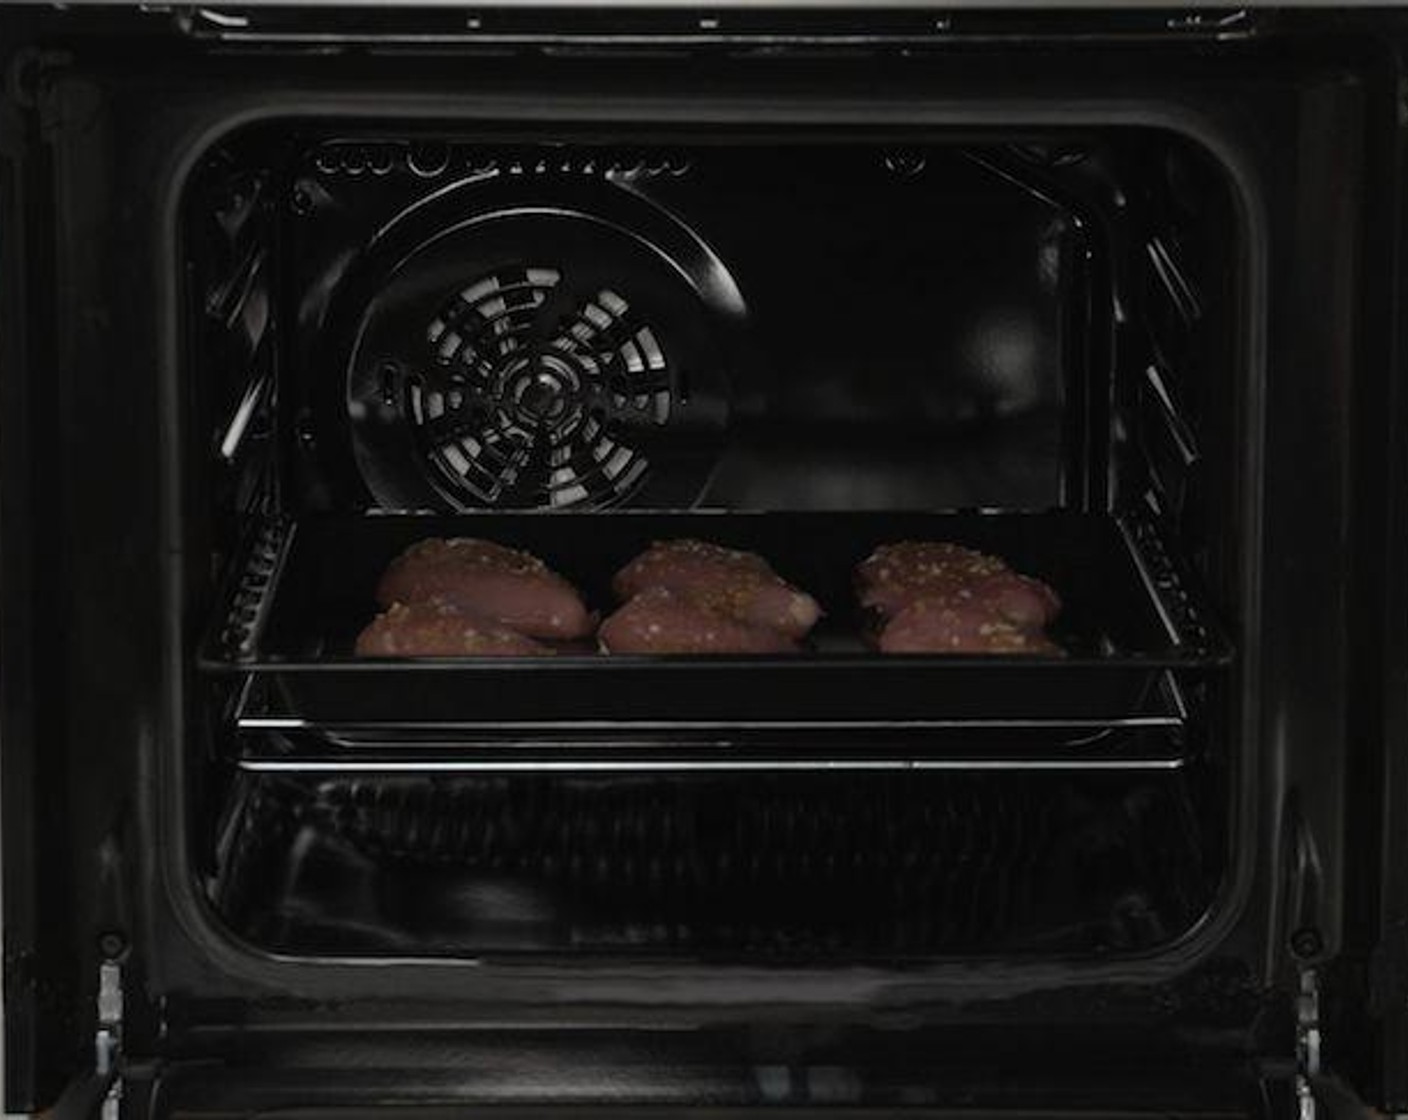 step 6 Unlike grilling on a pan, the Electrolux oven emits less heat. This means less smoke, making it easier to control inner temperature, resulting in the healthiest, juiciest chicken.